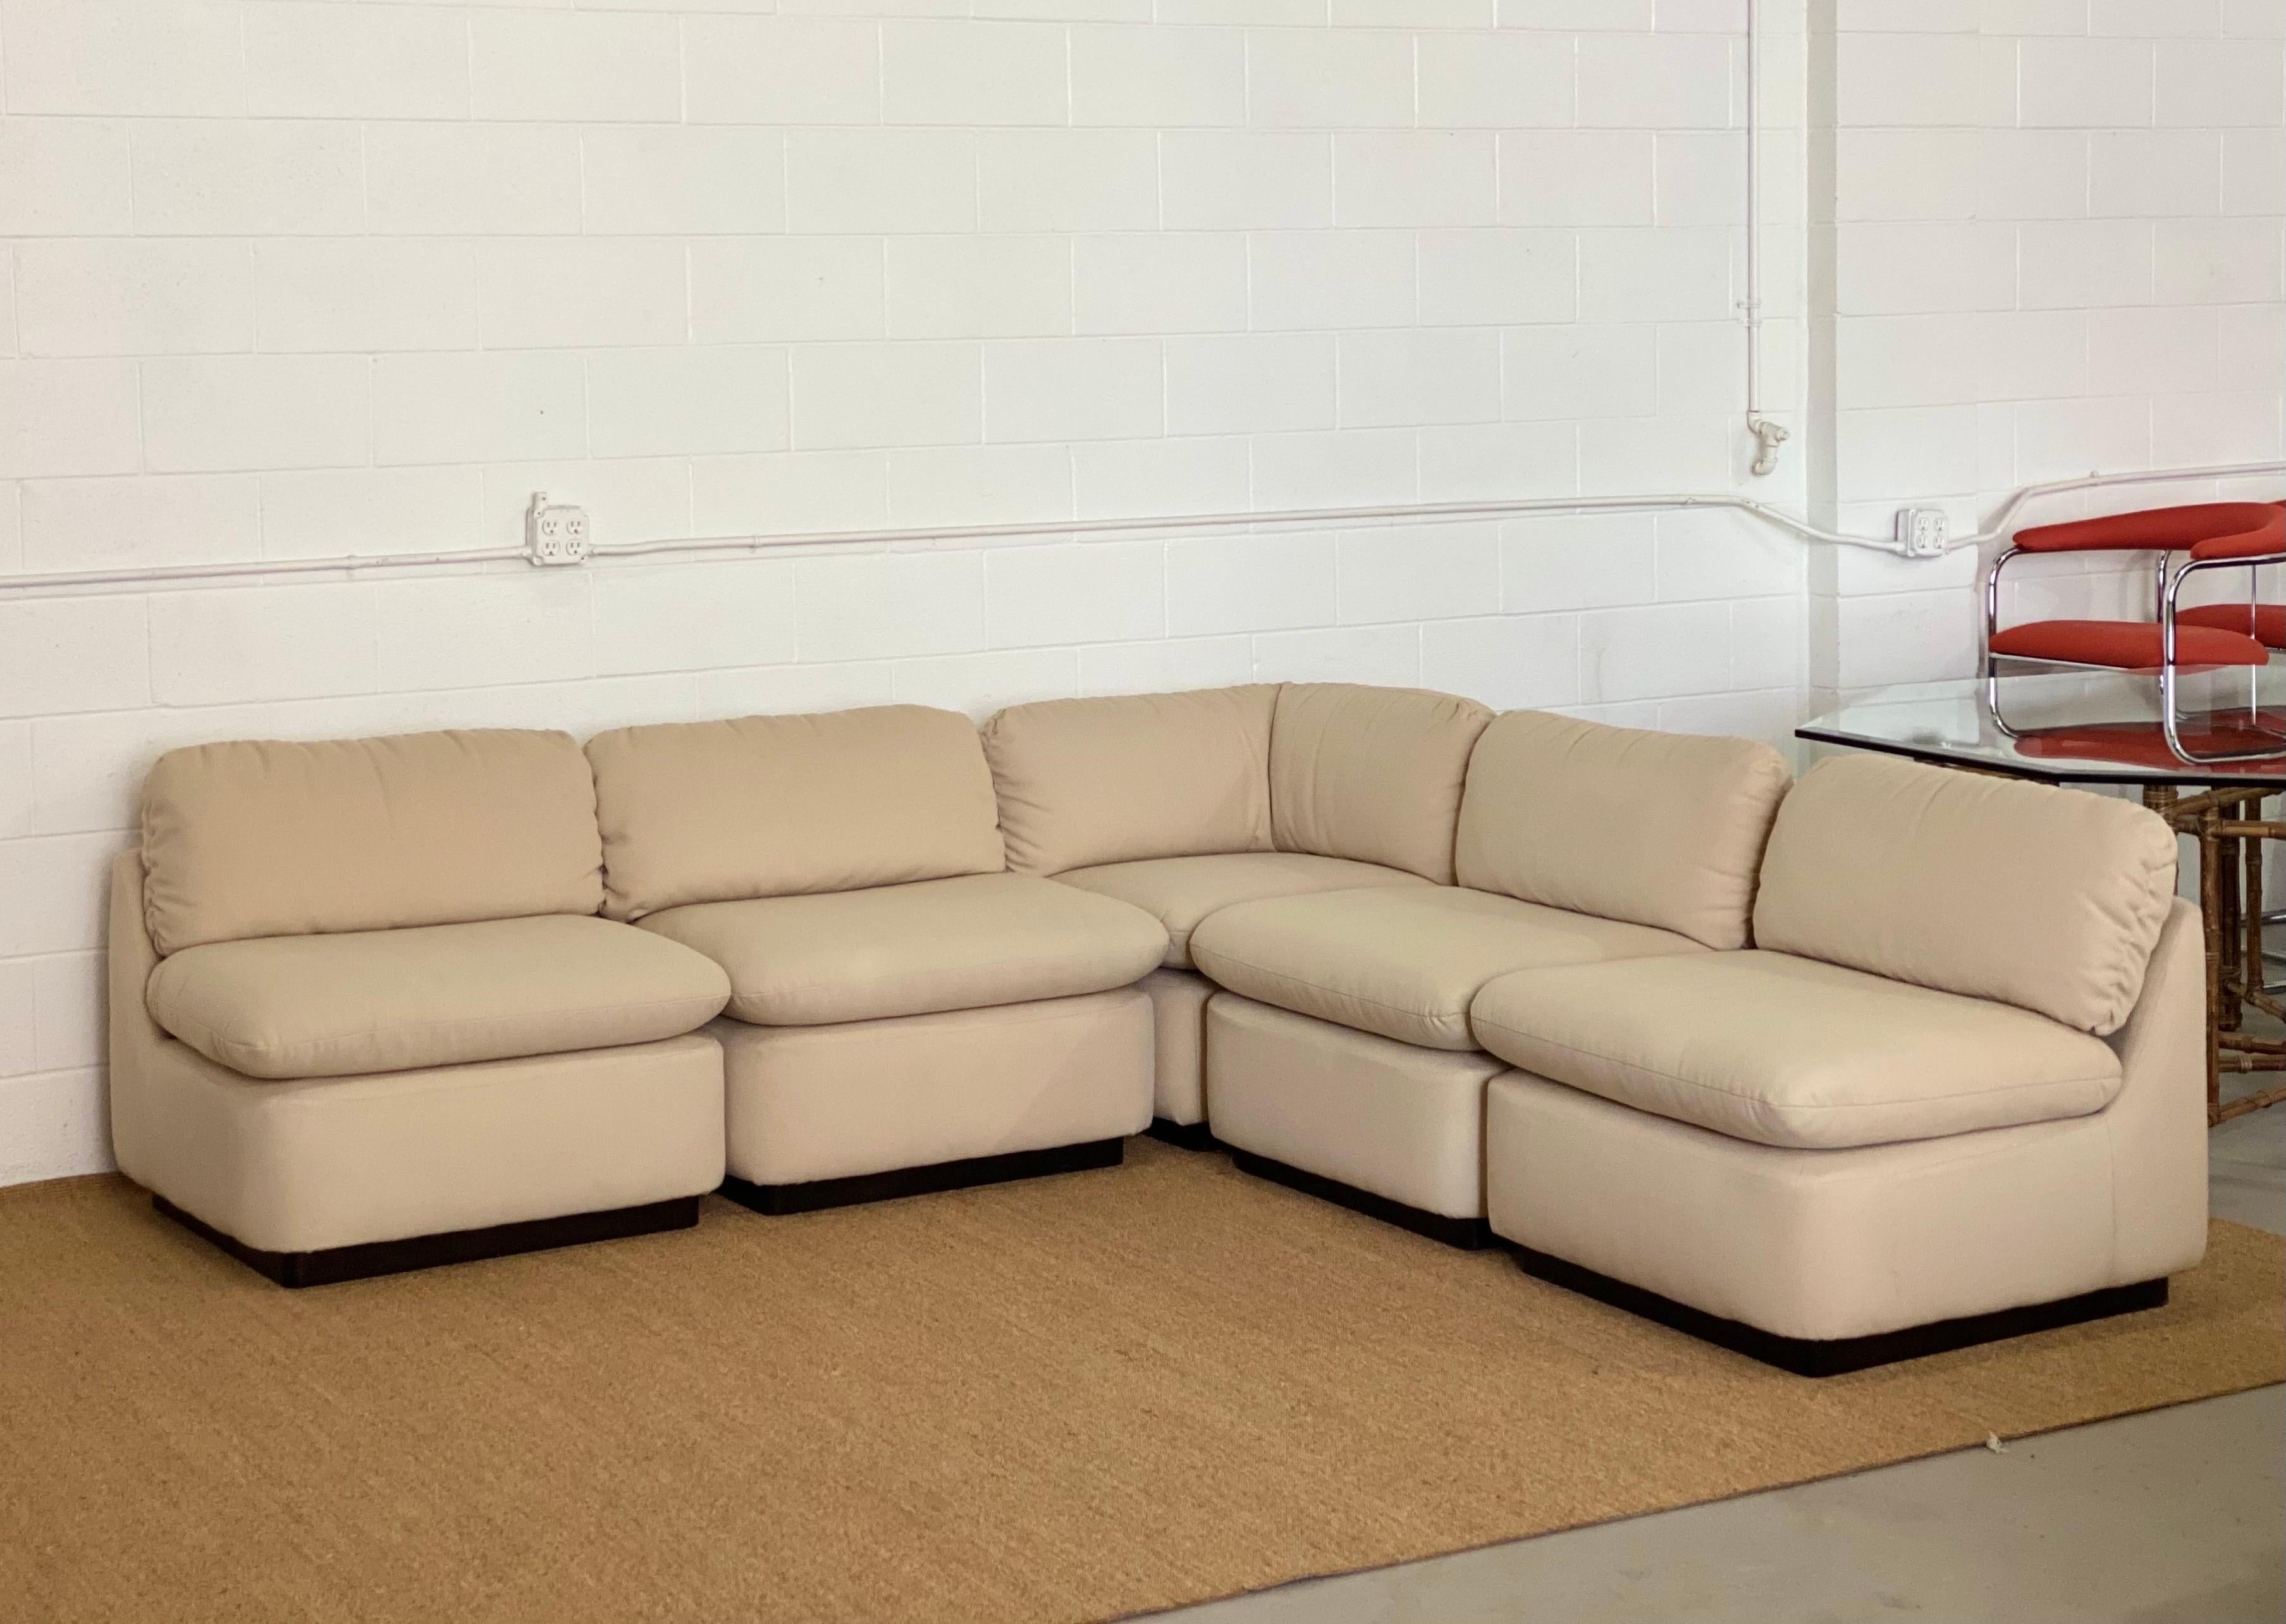 Modern 1990s Directional White Ivory Five Piece Modular Lounge Sectional – 5 Pieces For Sale